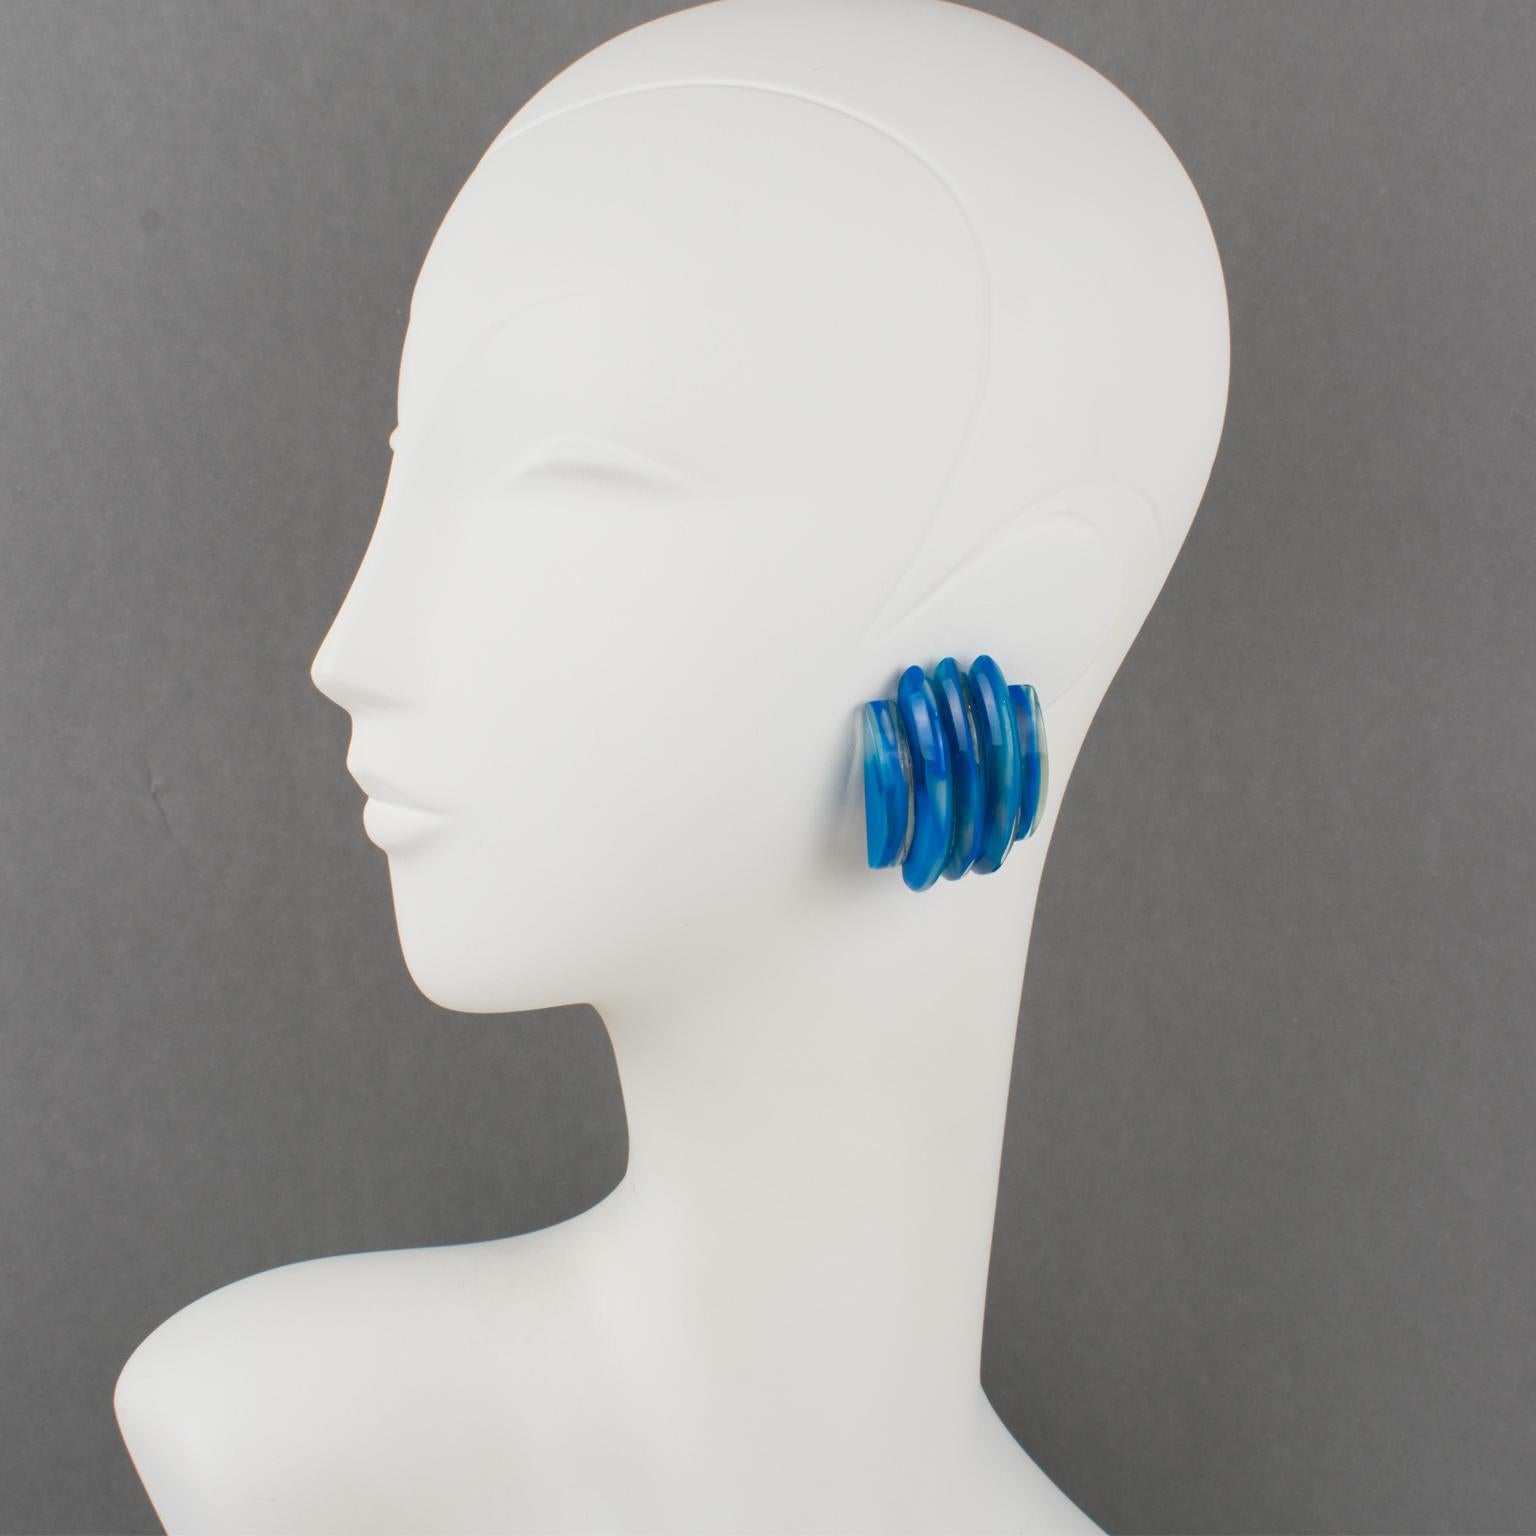 Gorgeous Lucite clip-on earrings designed by Harriet Bauknight for Kaso. Featuring a large dimensional domed shape with a carved striped pattern in cobalt blue swirling color. 
Kaso paper sticker missing but the specific rotating clip back is an